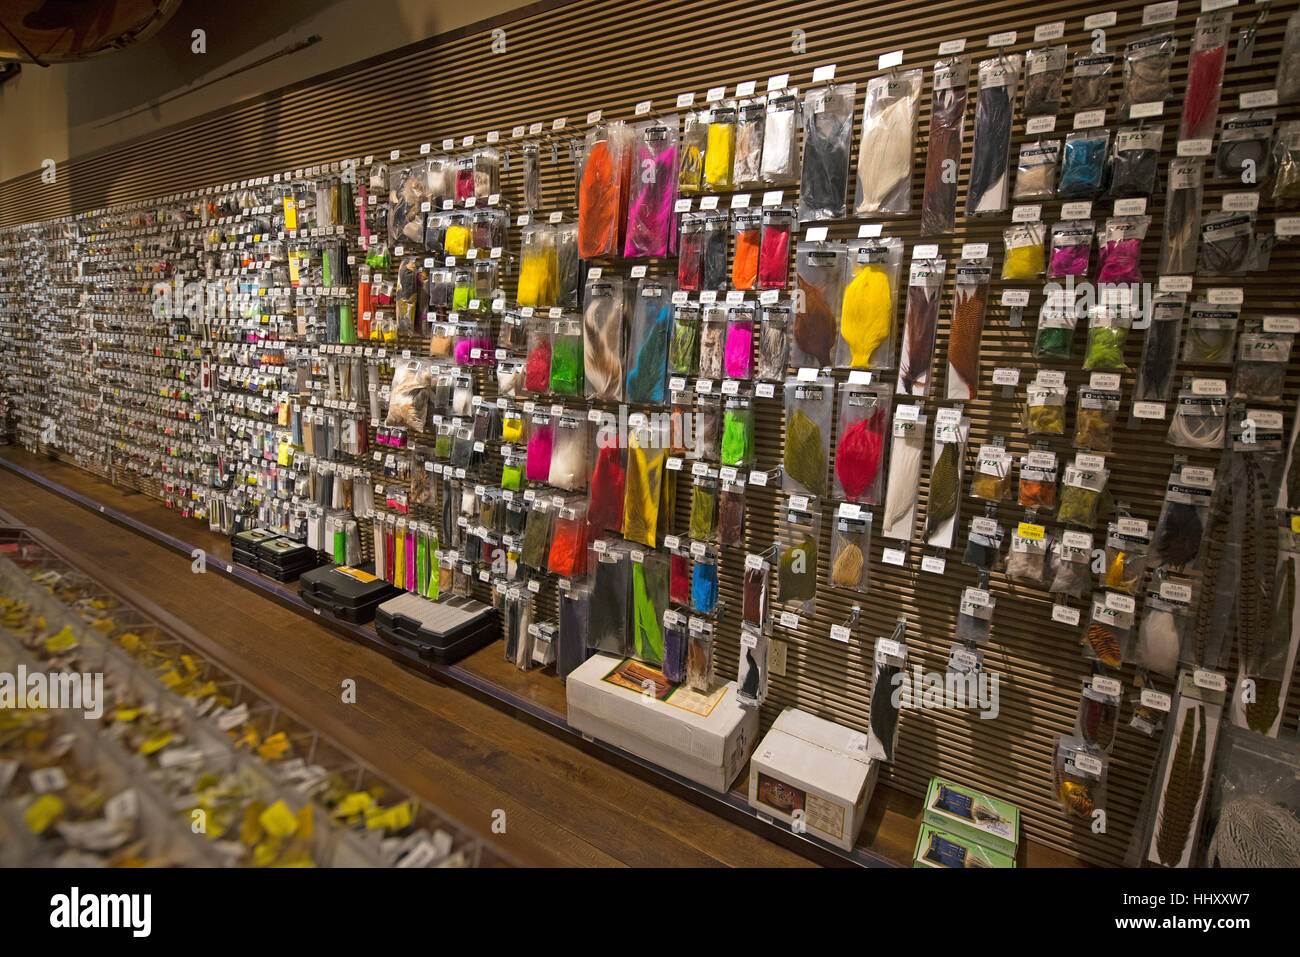 A display of Fly tying Materials for Flyfishing SCO 11,690 Stock Photo -  Alamy